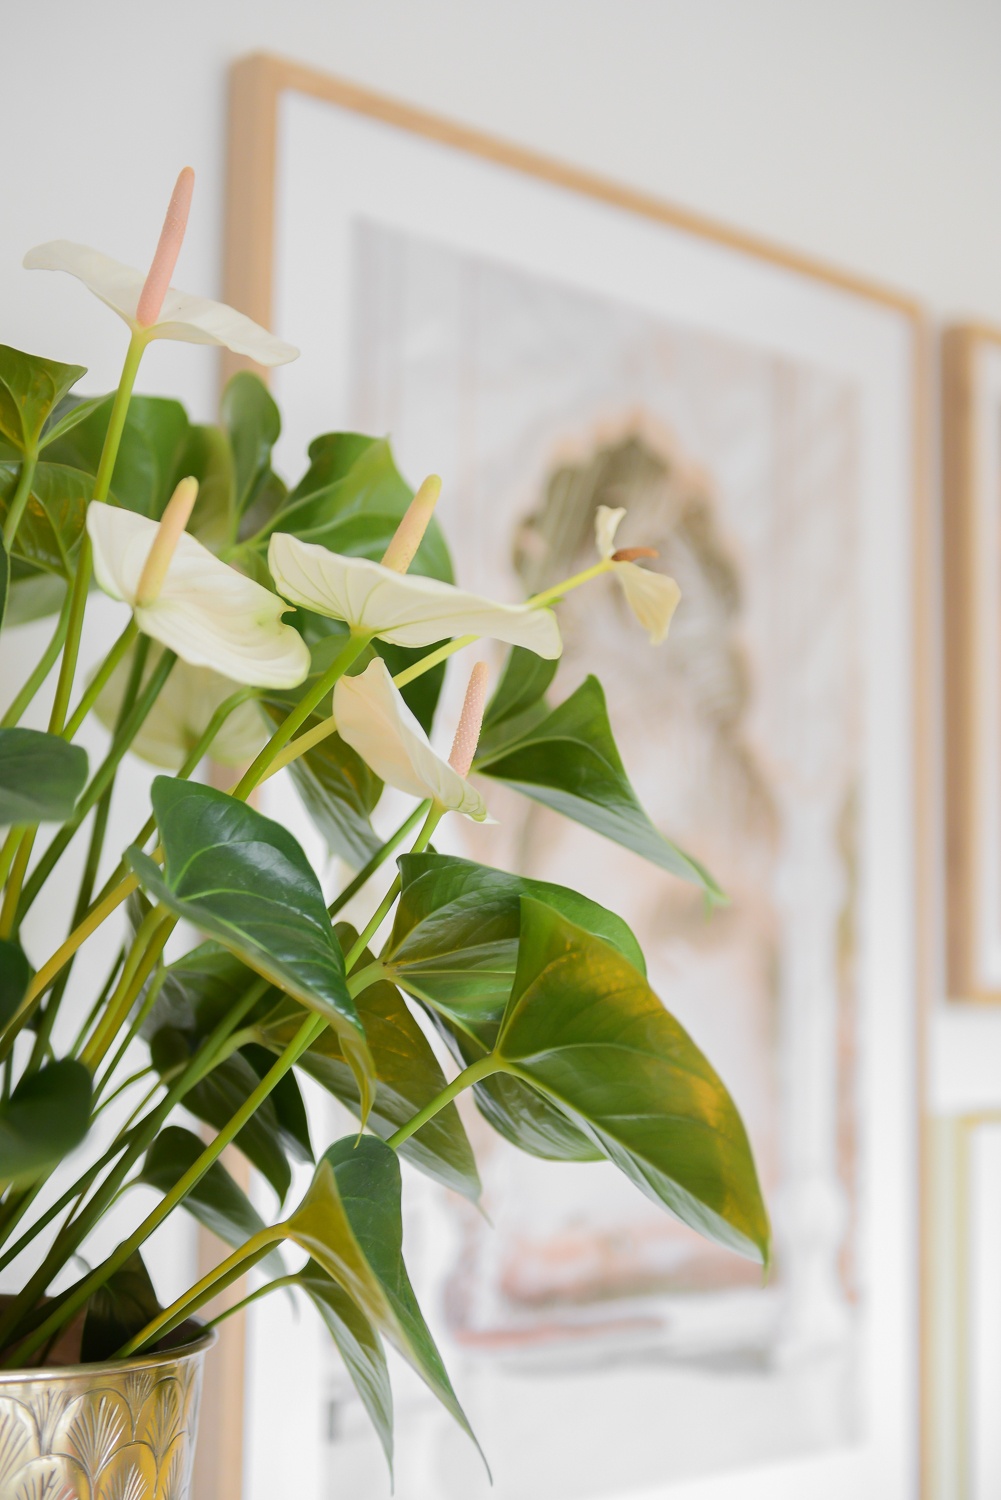 This is how blogger Binti Home styles Anthuriums in her interior